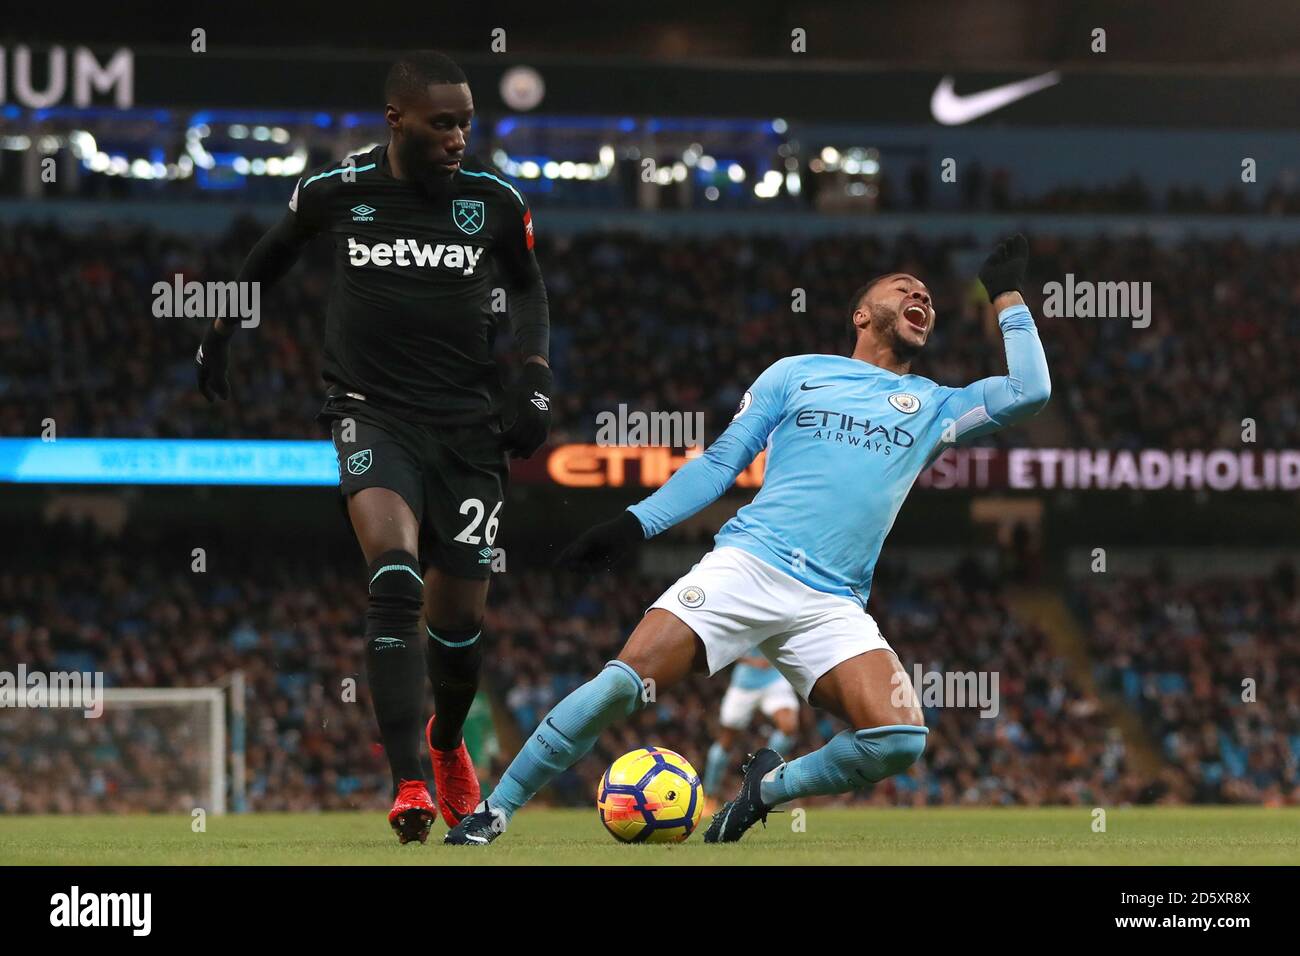 Manchester City's Raheem Sterling (right) goes down in the penalty area after a challenge by West Ham United's Arthur Masuaku but no penalty is awarded  Stock Photo